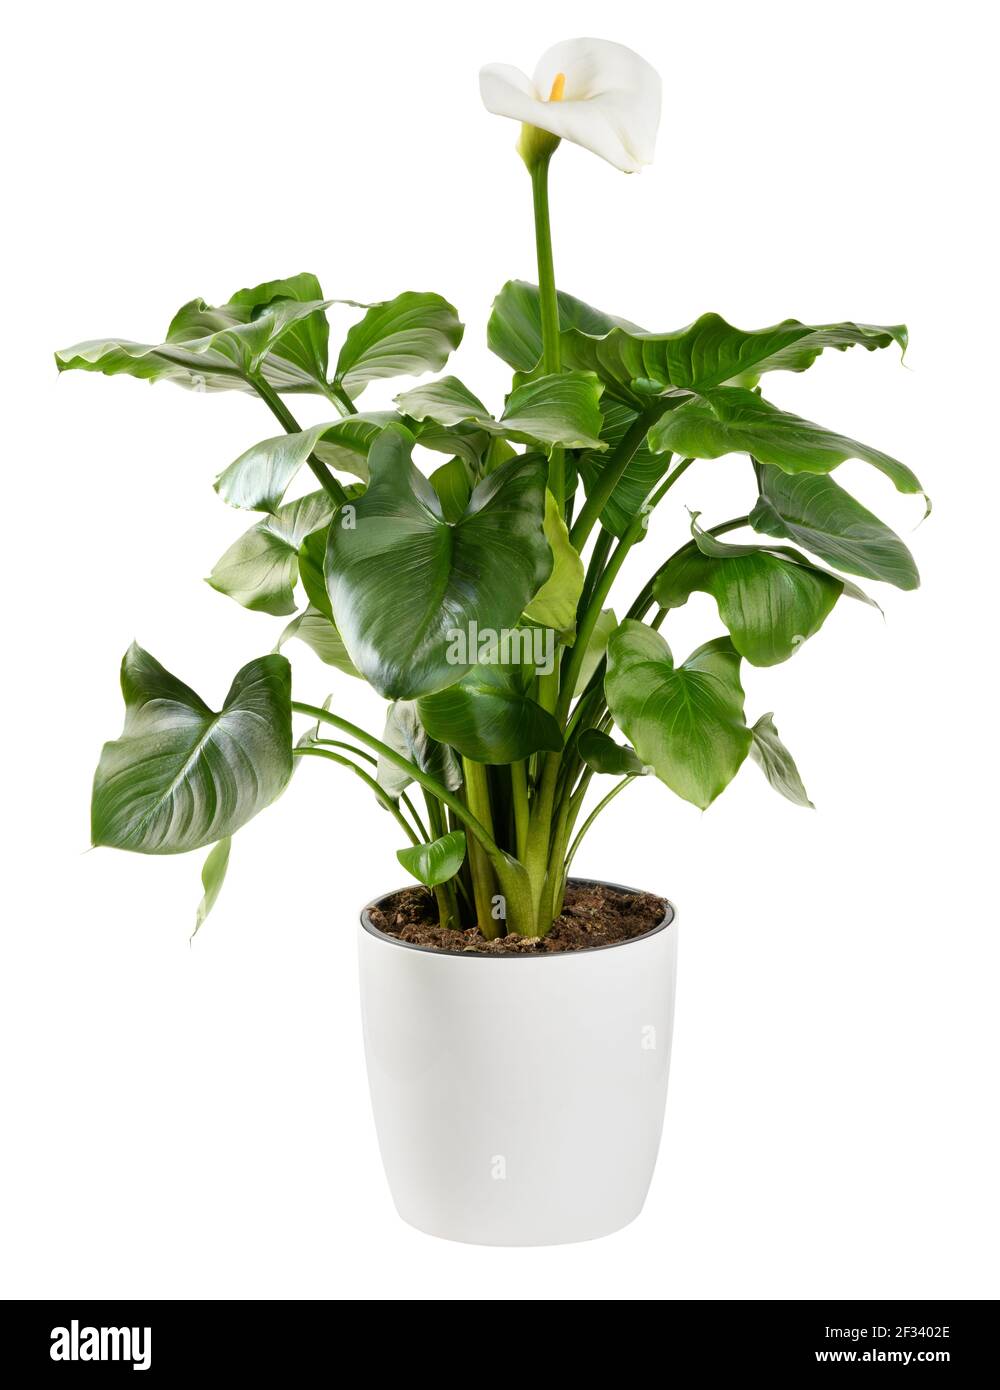 Ornamental Calla lily plant with white inflorescence showing the typical spathe and yellow spadix with glossy green leaves in a flowerpot isolated on Stock Photo